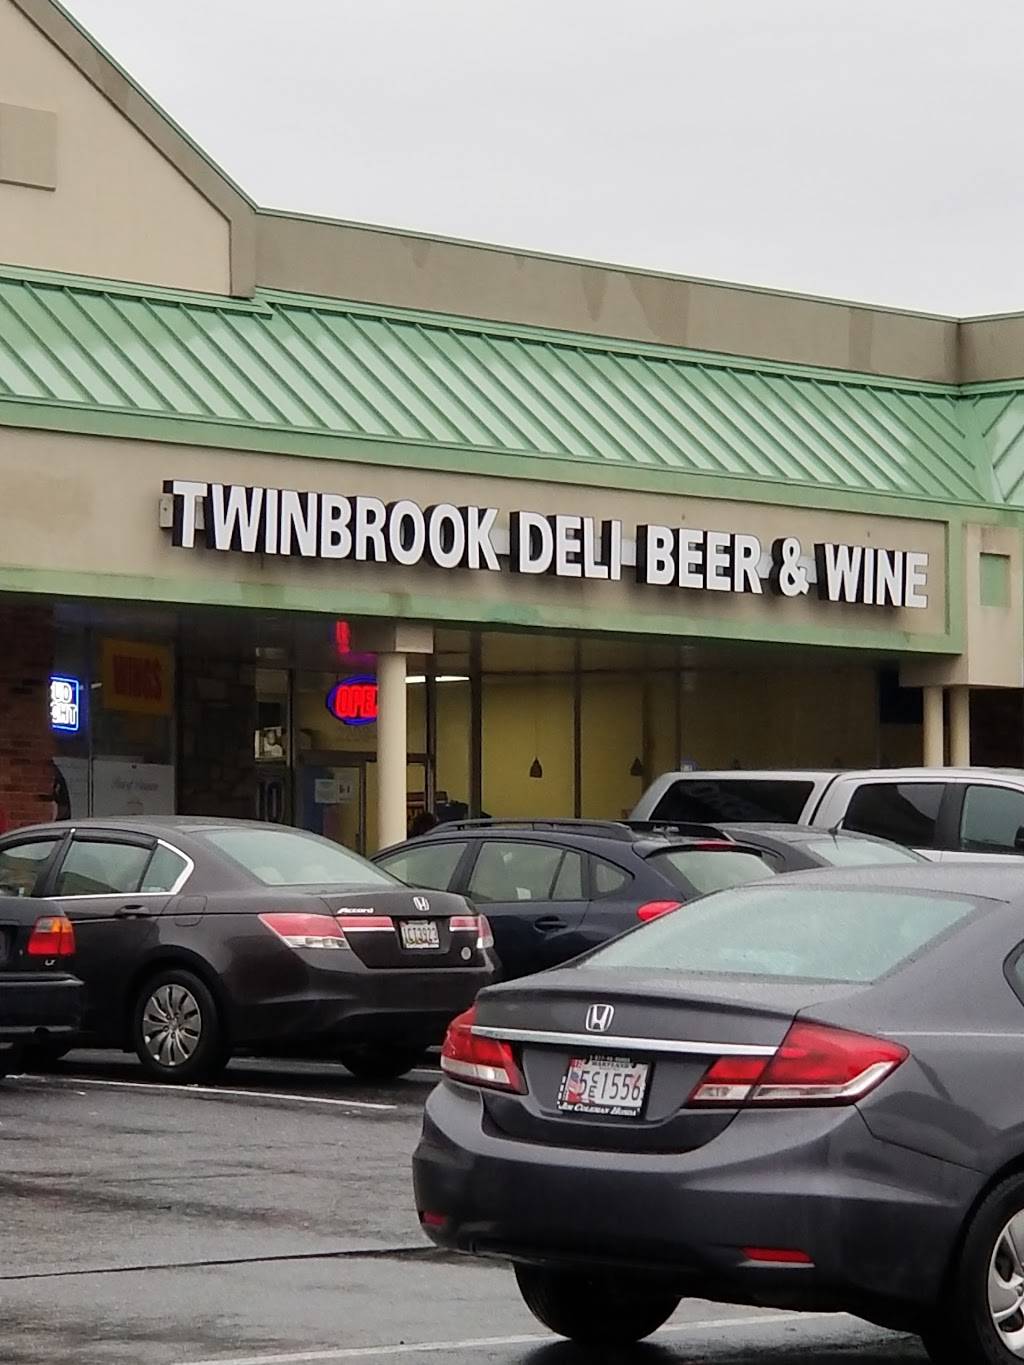 Twinbrook Deli Beer And Wine | meal takeaway | 2208 Veirs Mill Rd, Rockville, MD 20851, USA | 3017621712 OR +1 301-762-1712